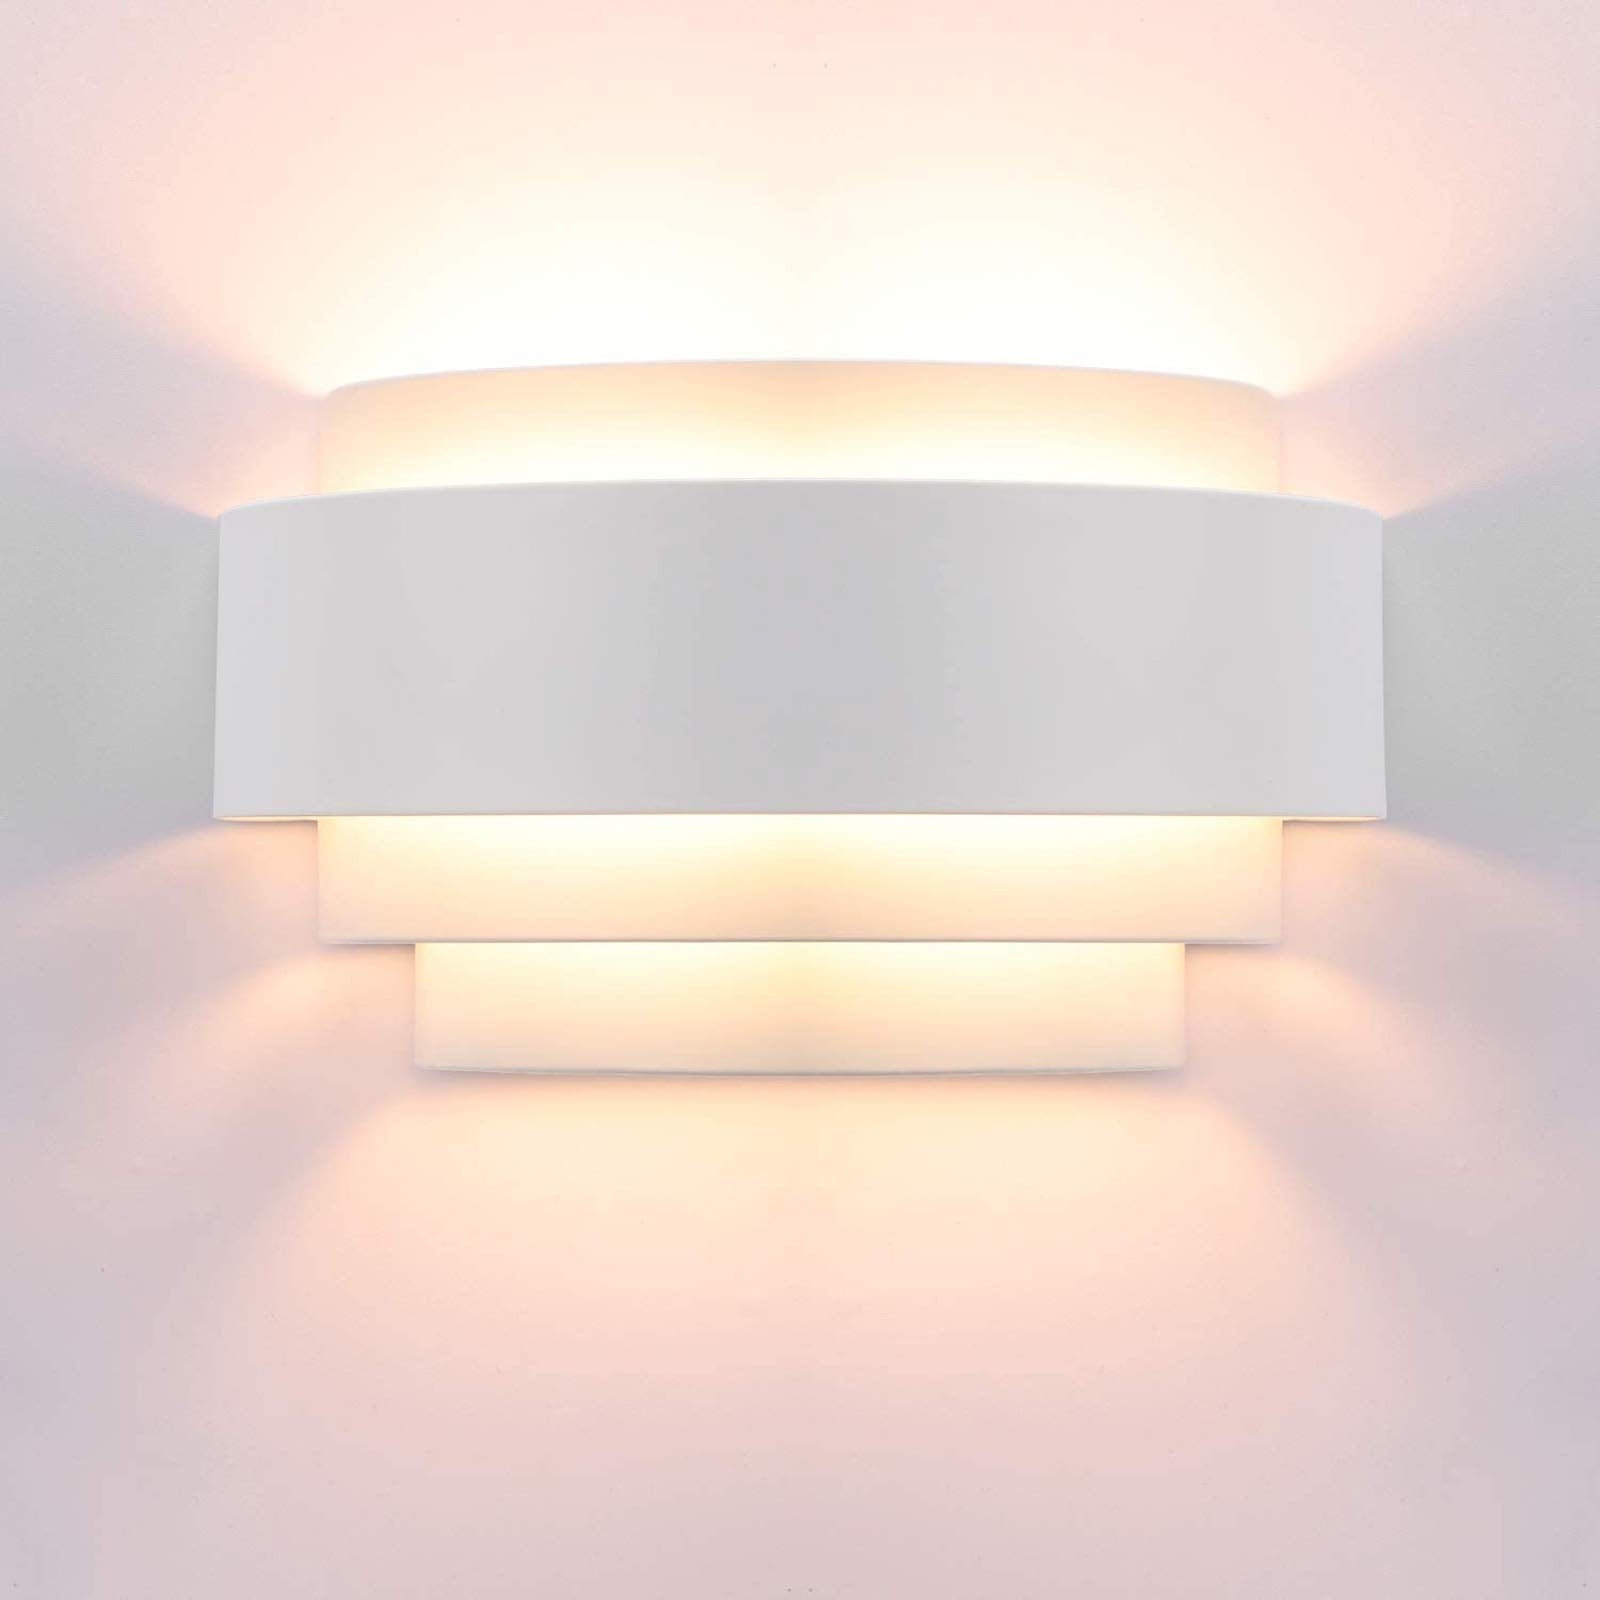 Lampop Modern LED Wall Lights Up and Down Wall Lamp Indoor Wall Sconce Lights Uplighter Downlighter E27 for Living Room Bedroom Bathroom, Warm White (Light Bulb Include)